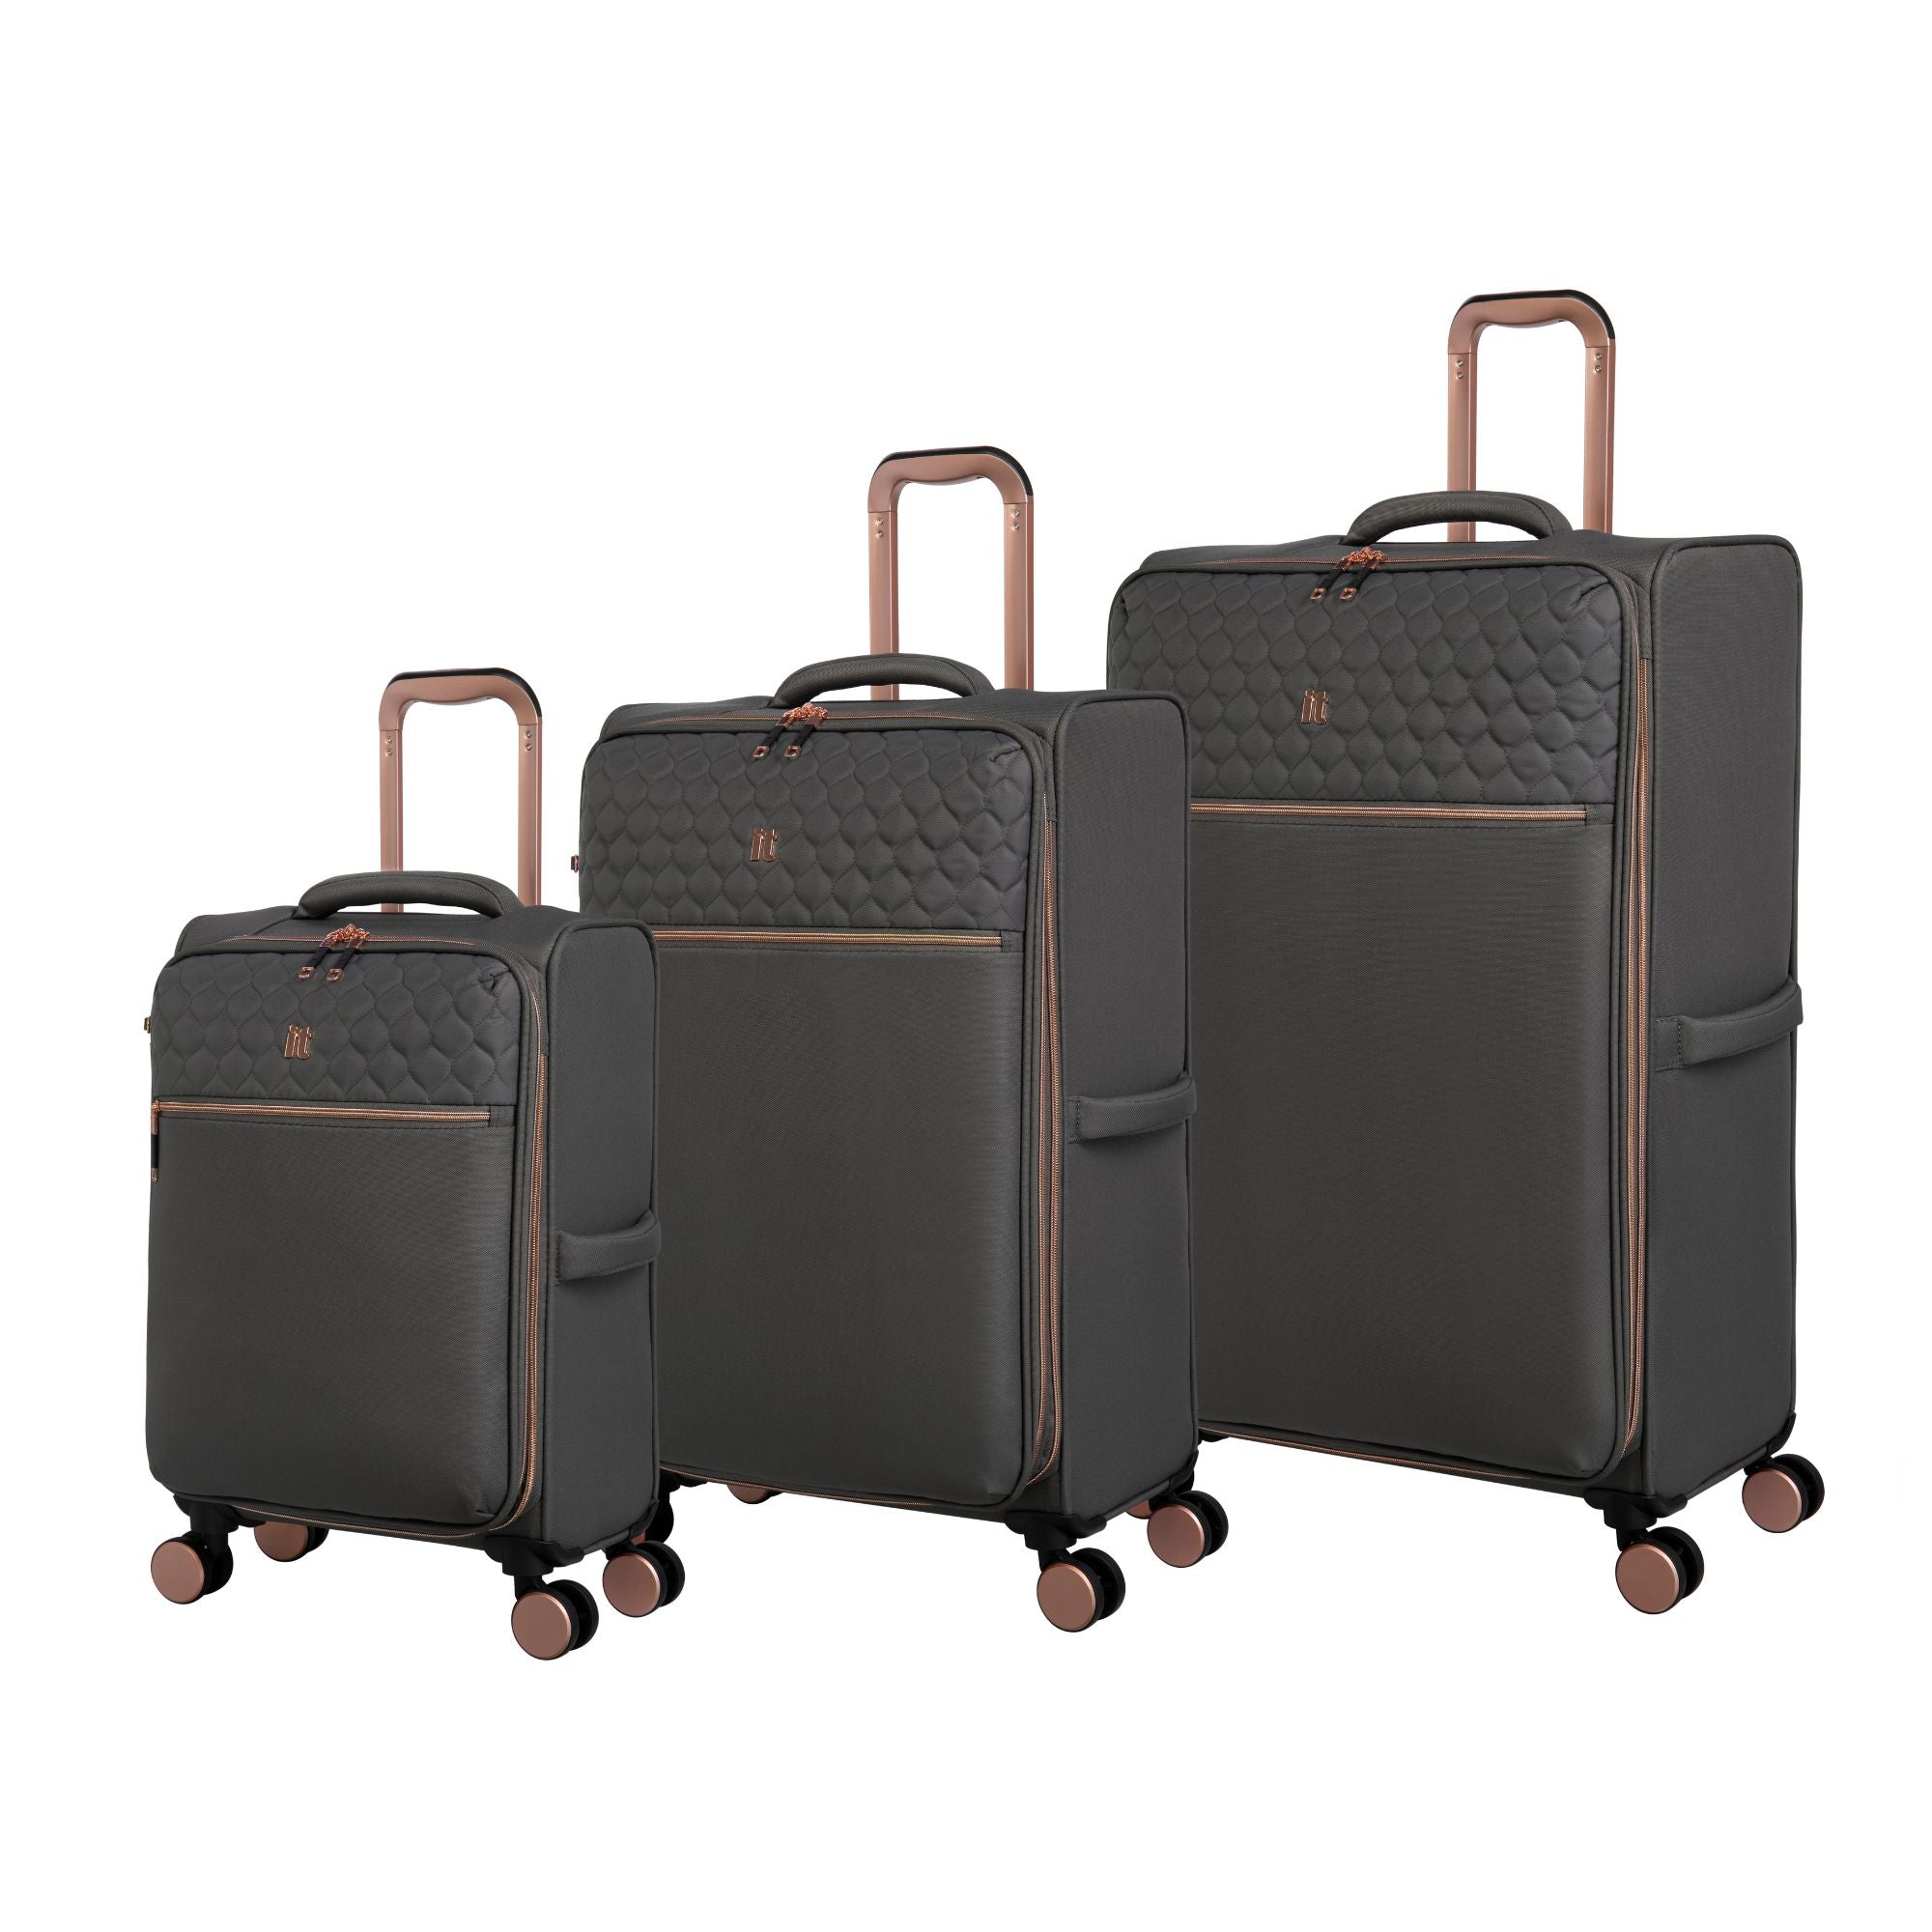 IT Luggage Suitcase Divinity - Grey and Rose Gold - 32 Inches  | TJ Hughes